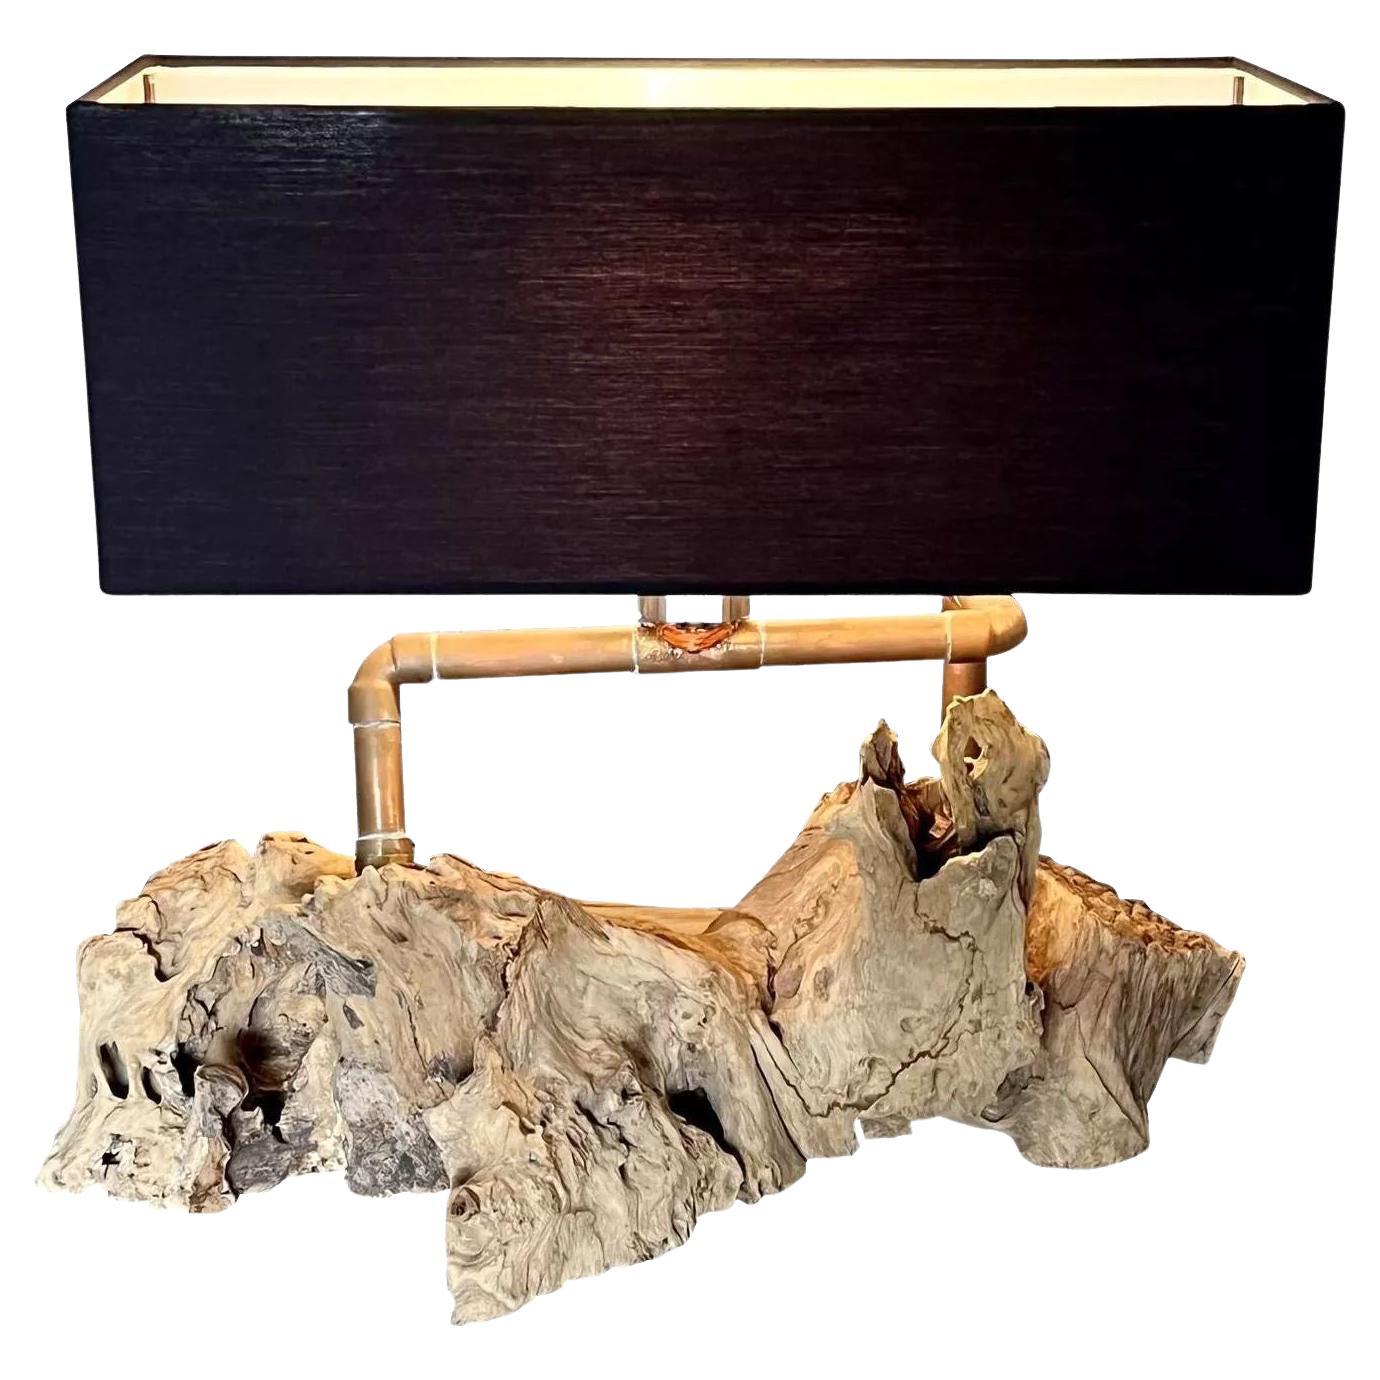 Organic Modern Design Table Lamp Driftwood with Copper Tubes, Austria 2022